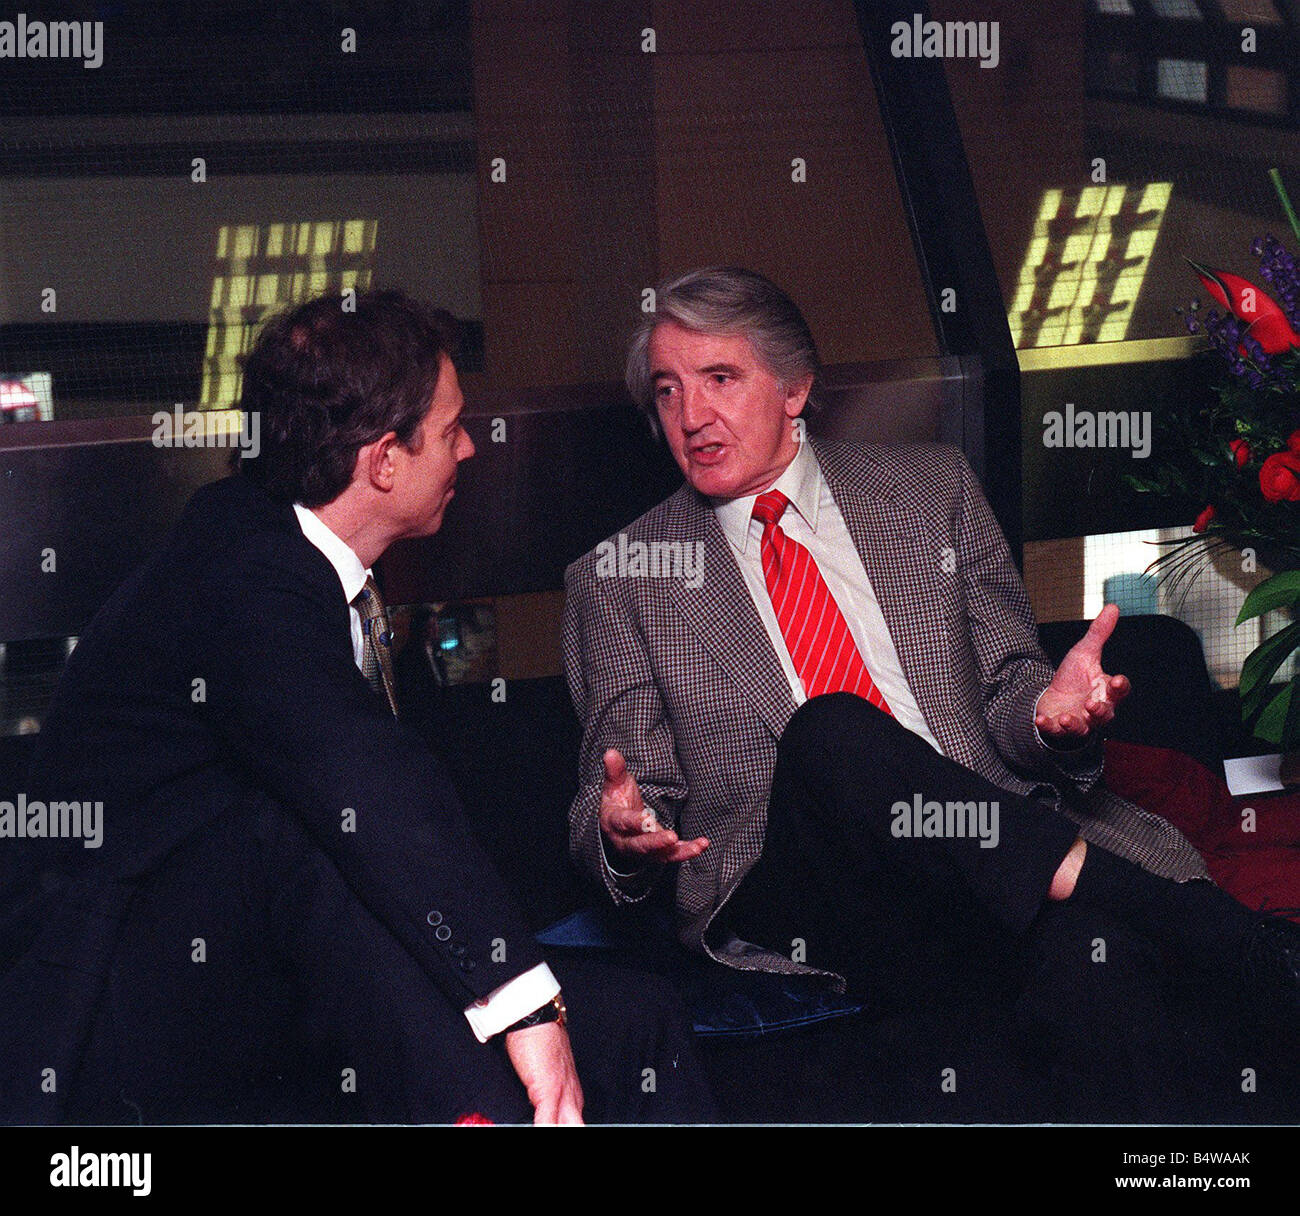 Dennis Skinner talks with Tony Blair before the NEC meeting at Millbank 24 March 1998 Stock Photo